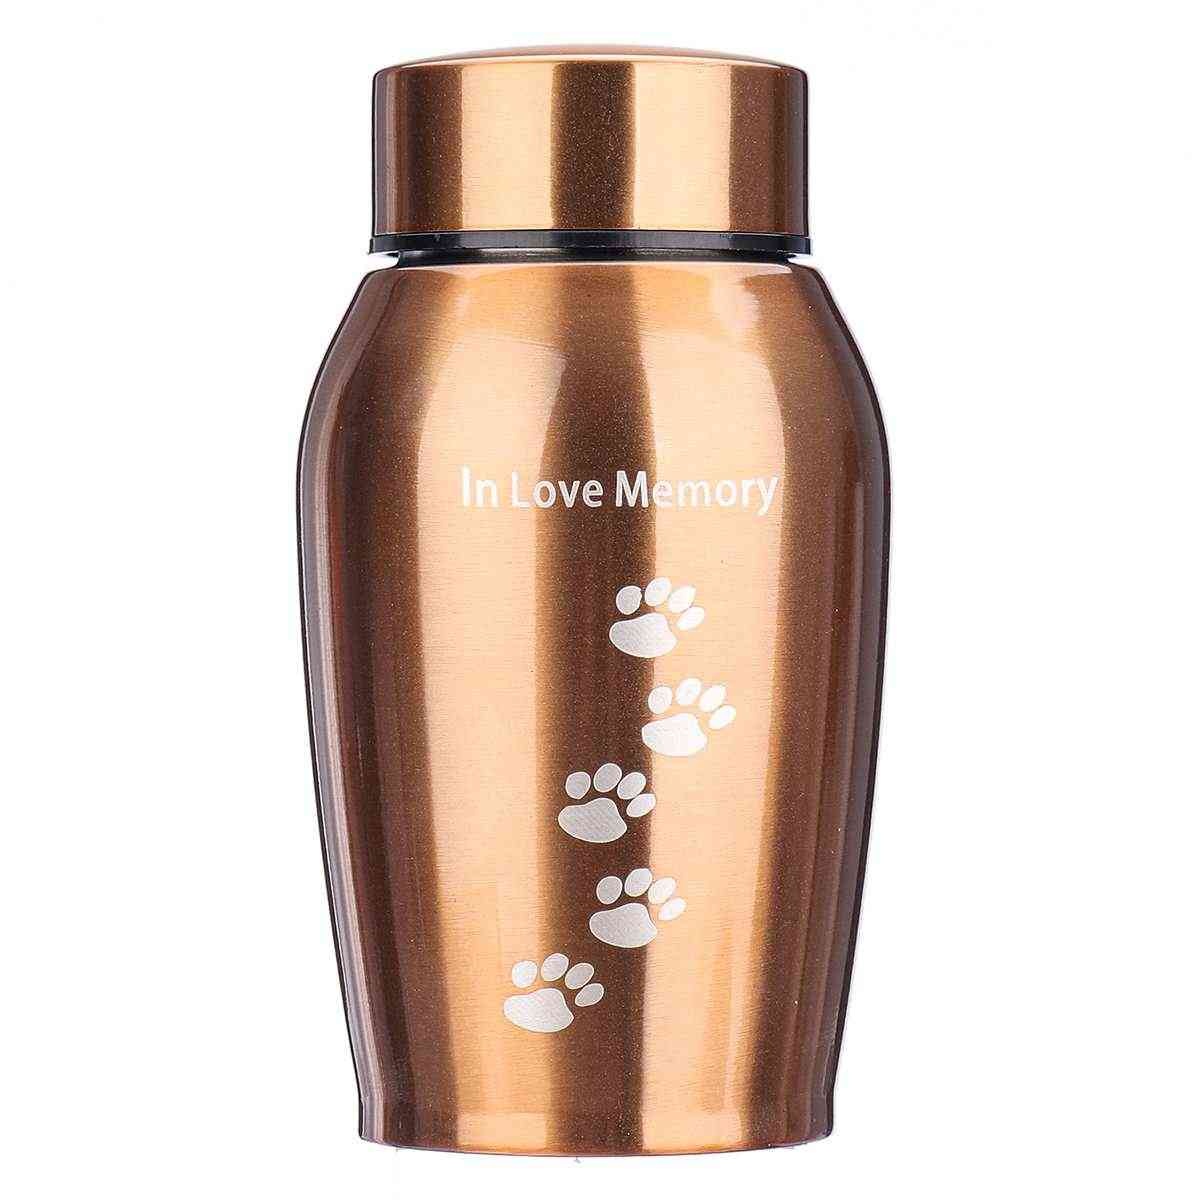 Pets Dog Cat Cremation Ashes Stainless Steel Urn